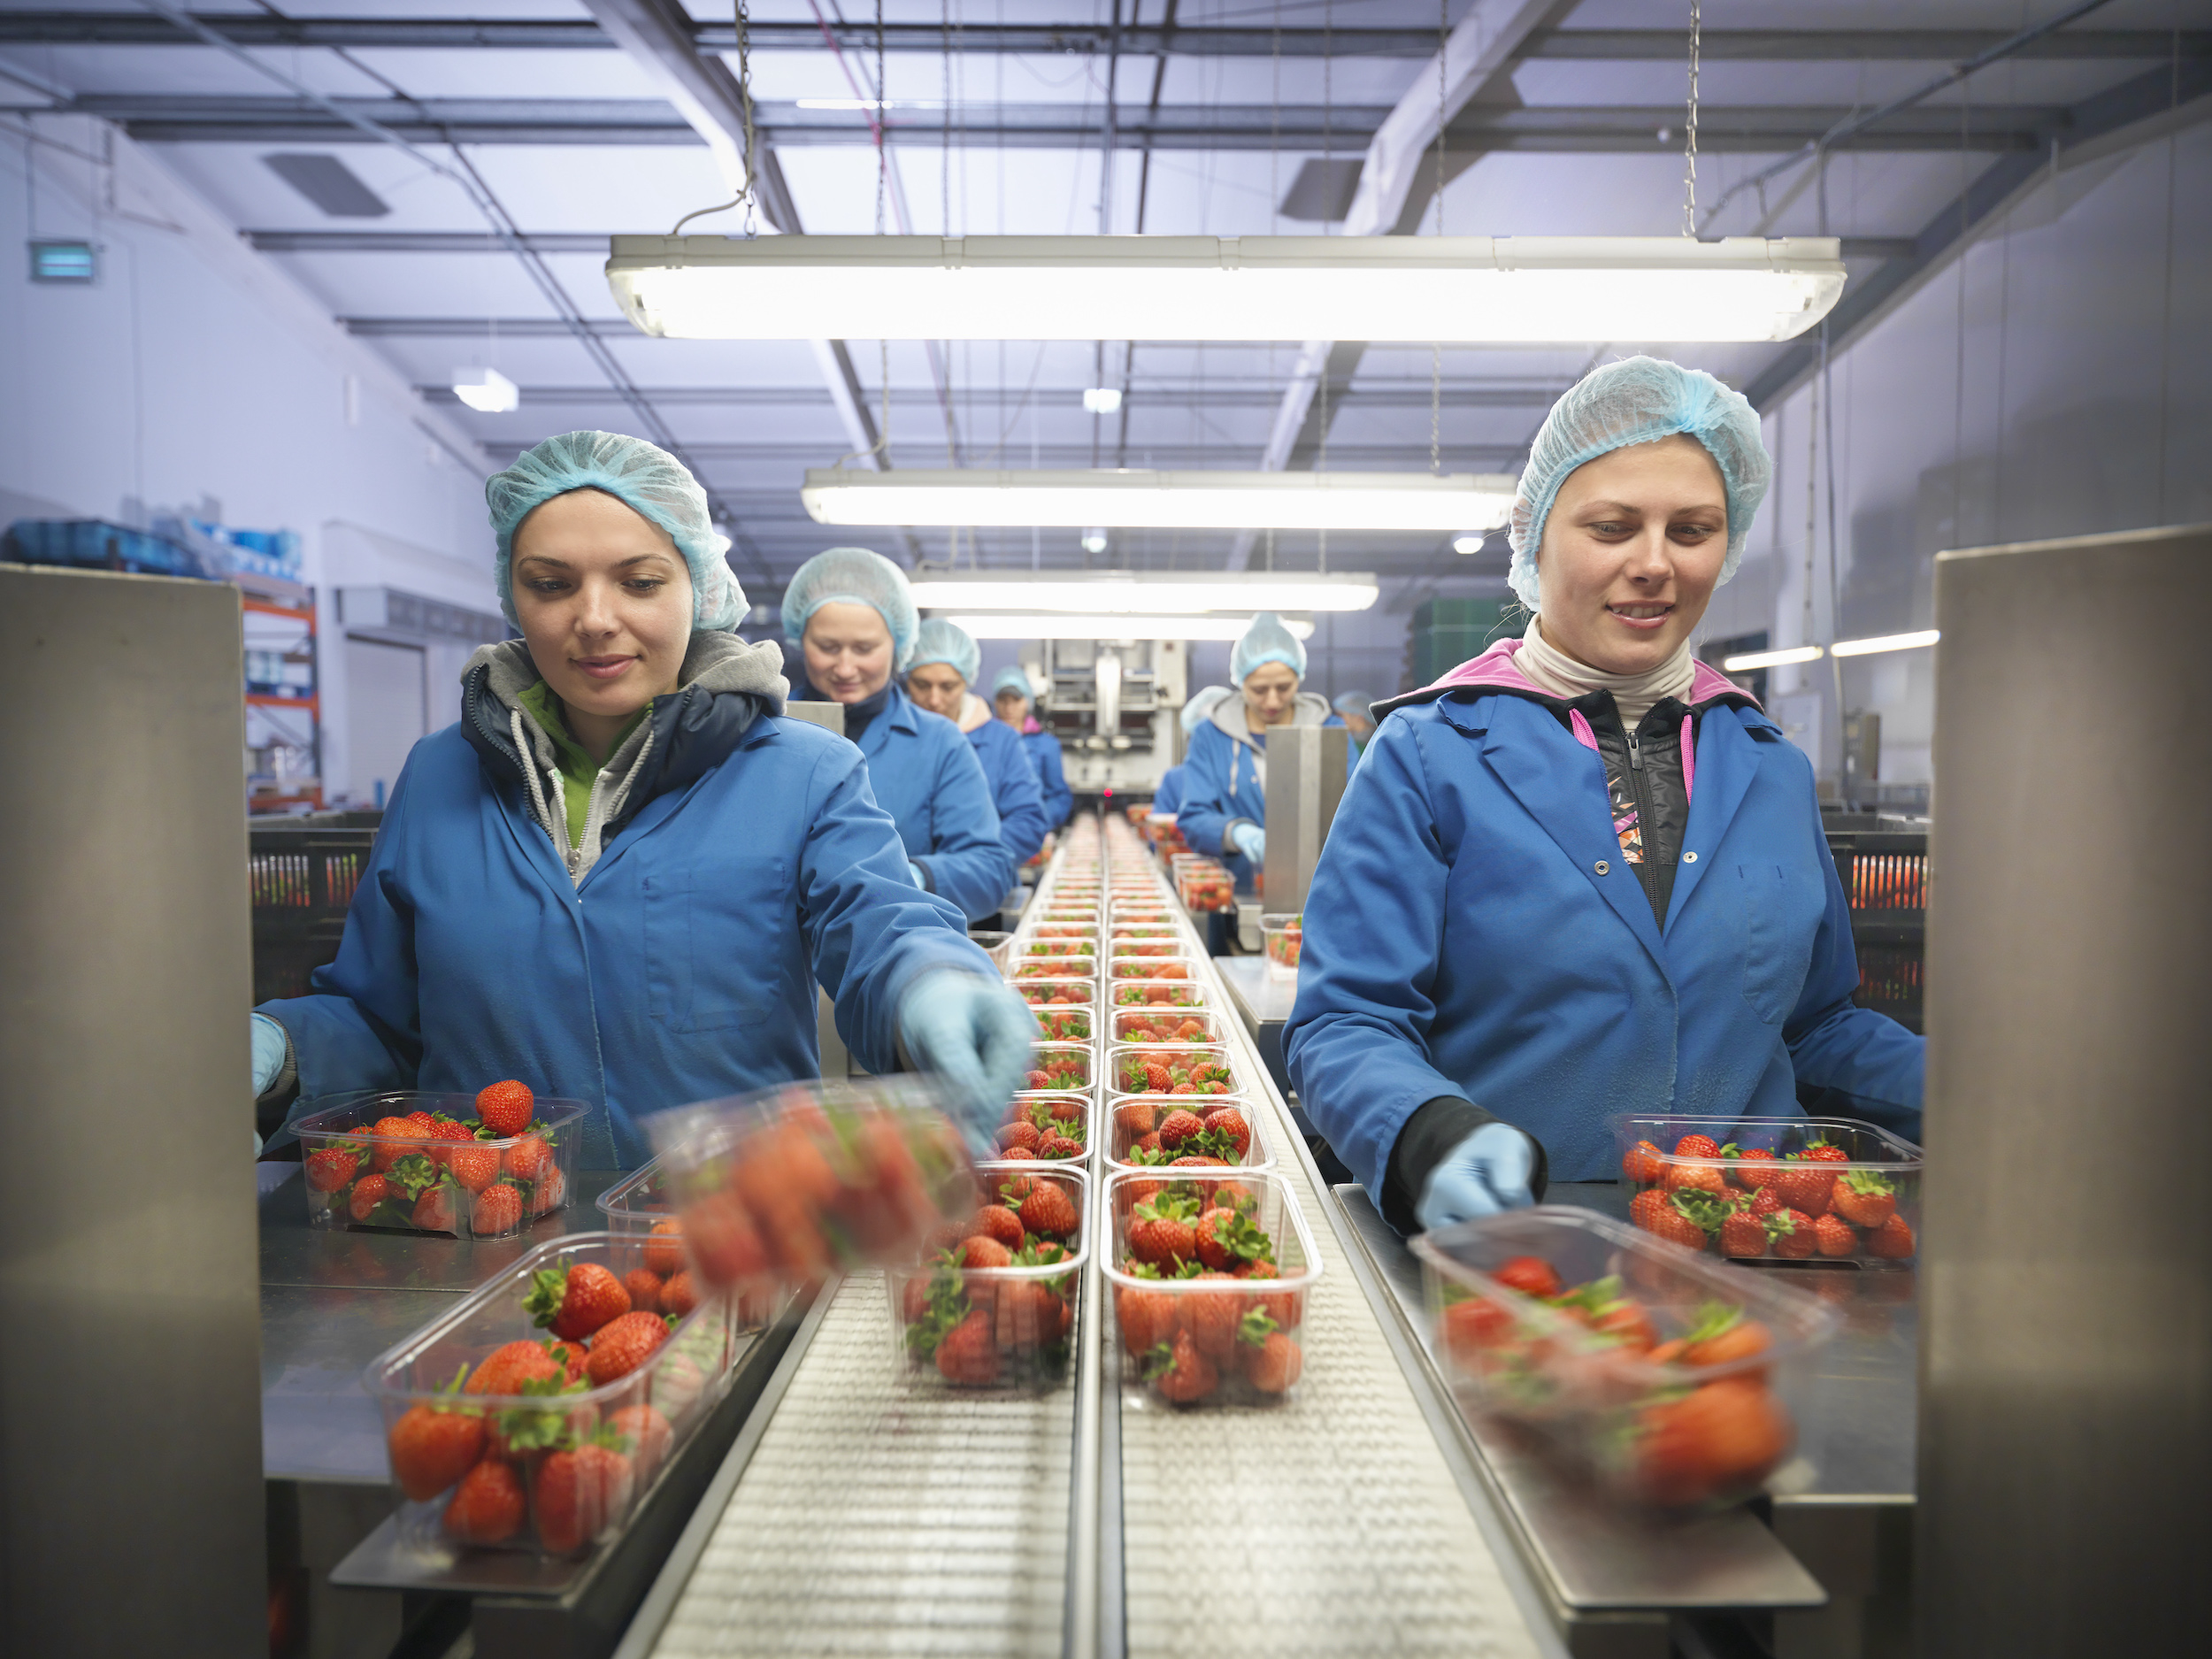 Workers removing strawberries off a conveyor belt